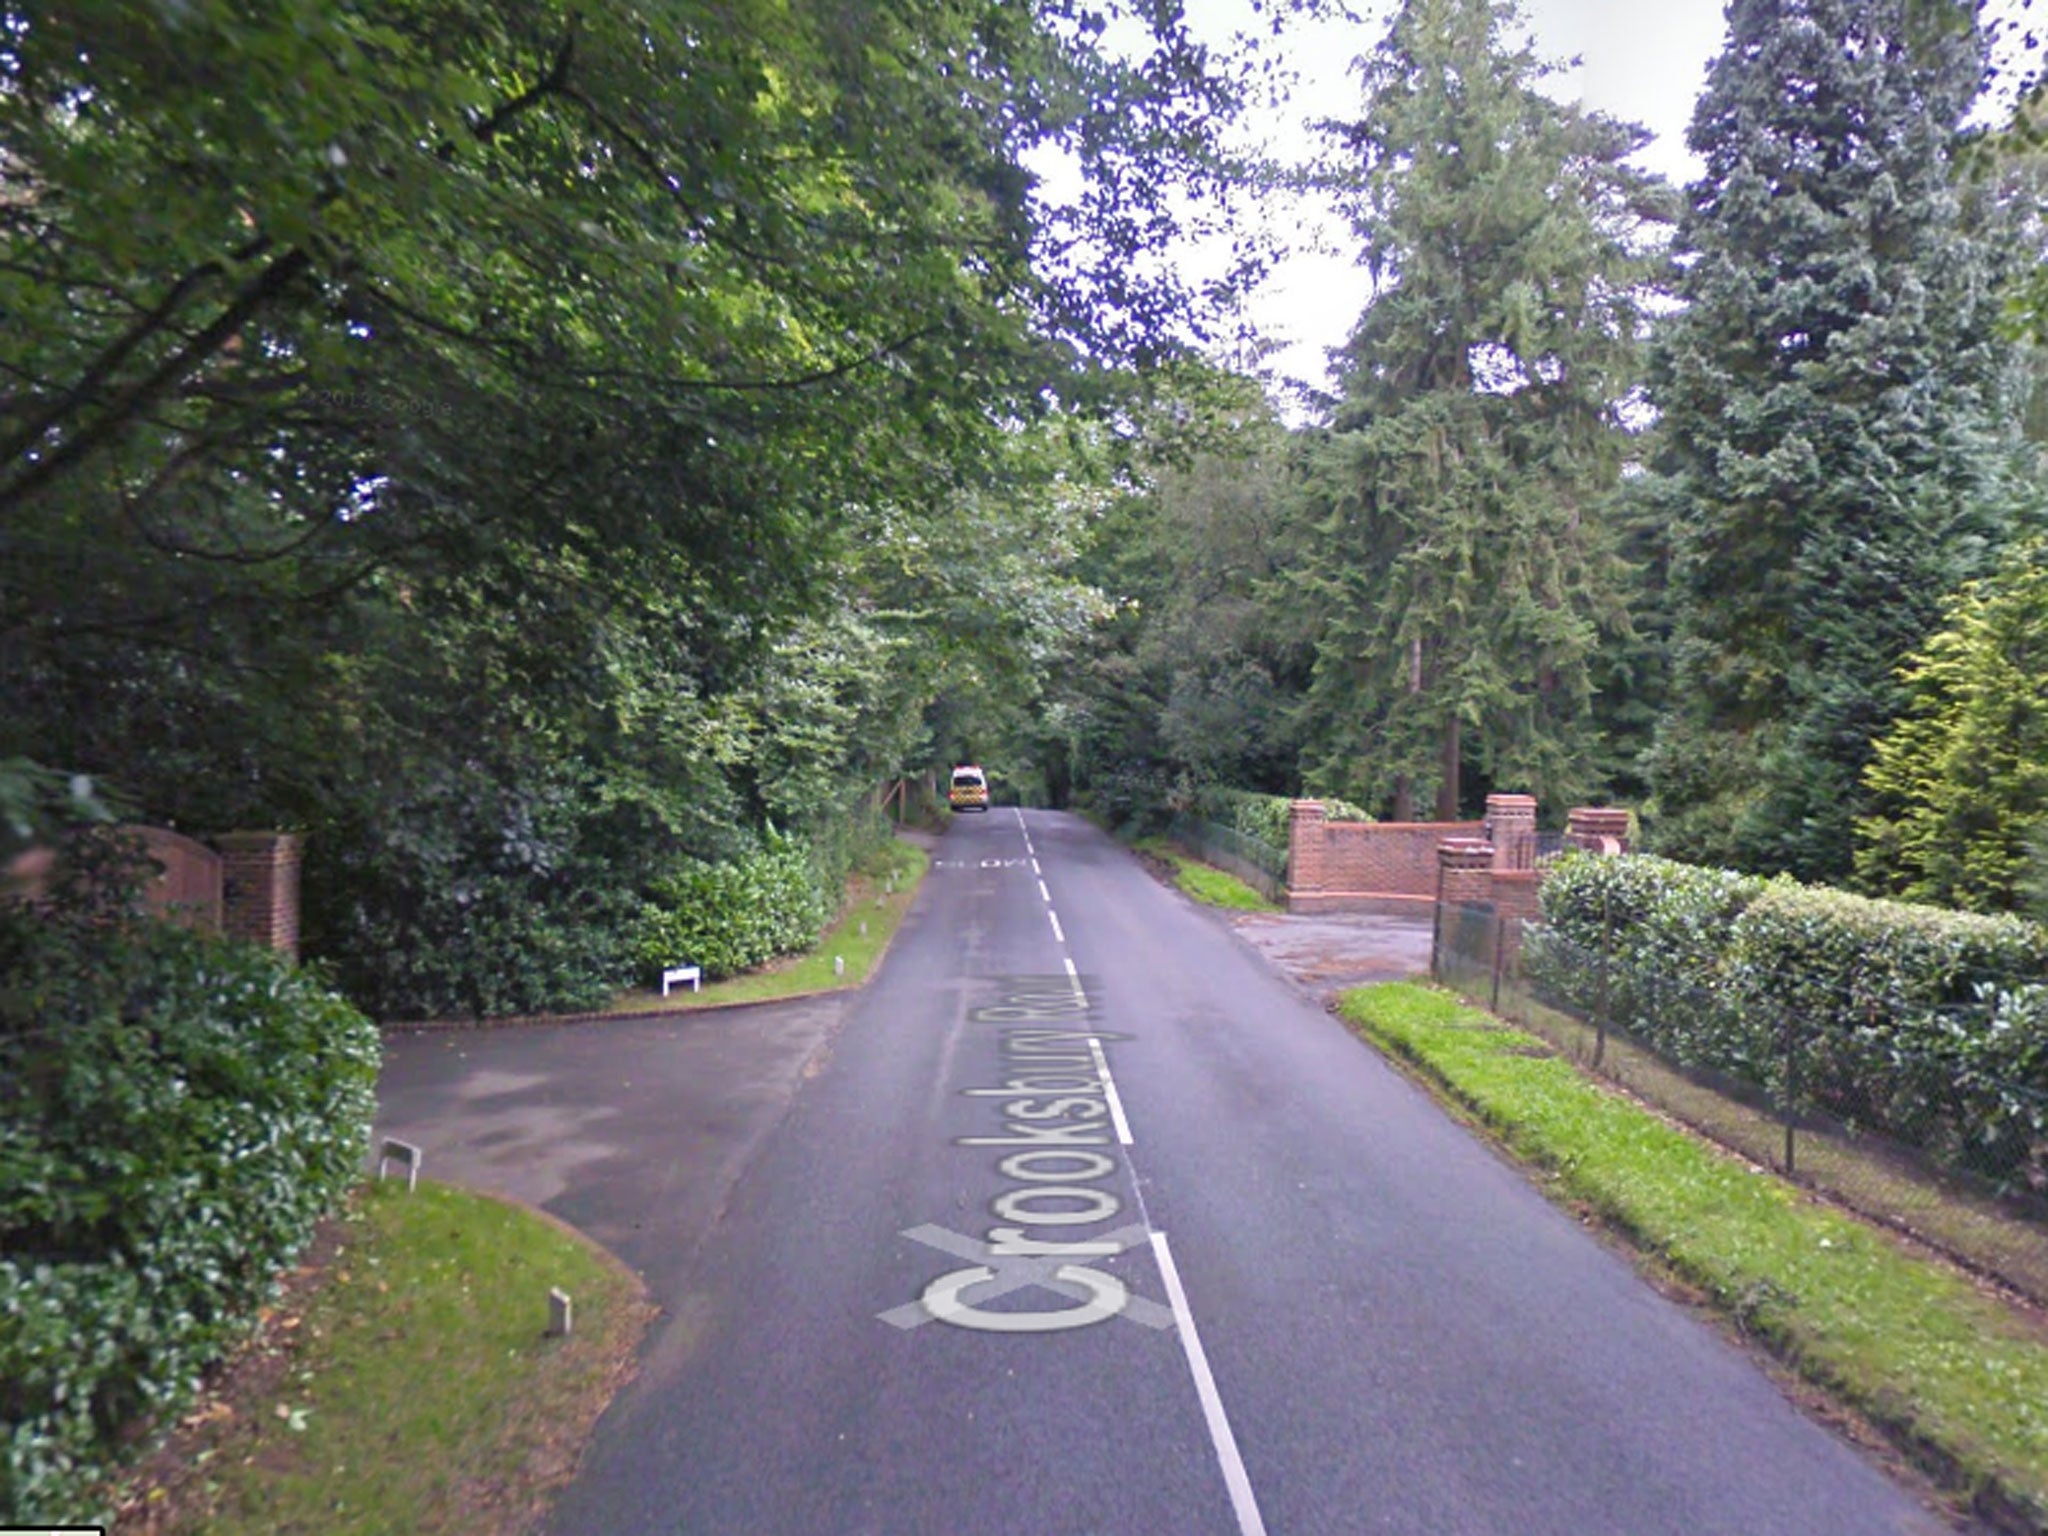 Police were called to an address off Crooksbury Road in the village of Farnham